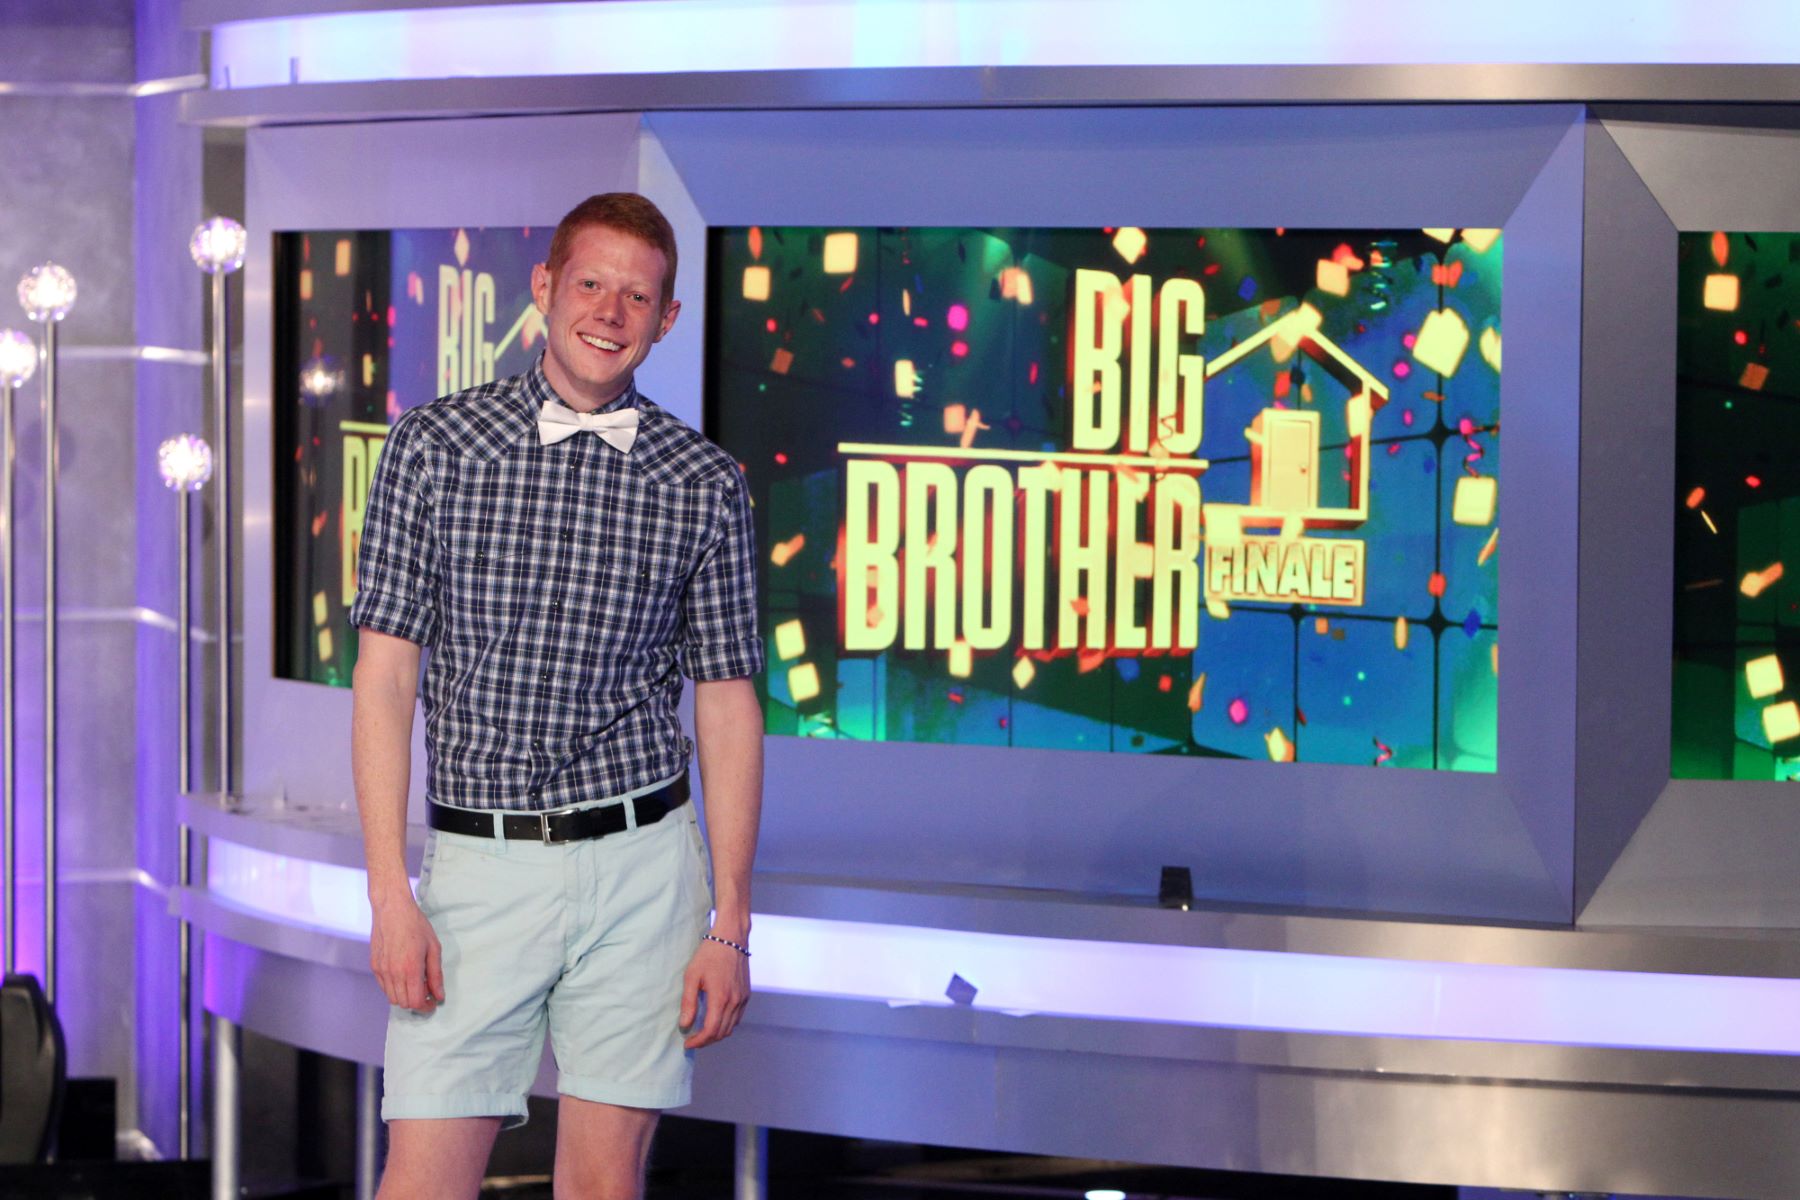 Andy Herren, who won 'Big Brother 15' on CBS, wears